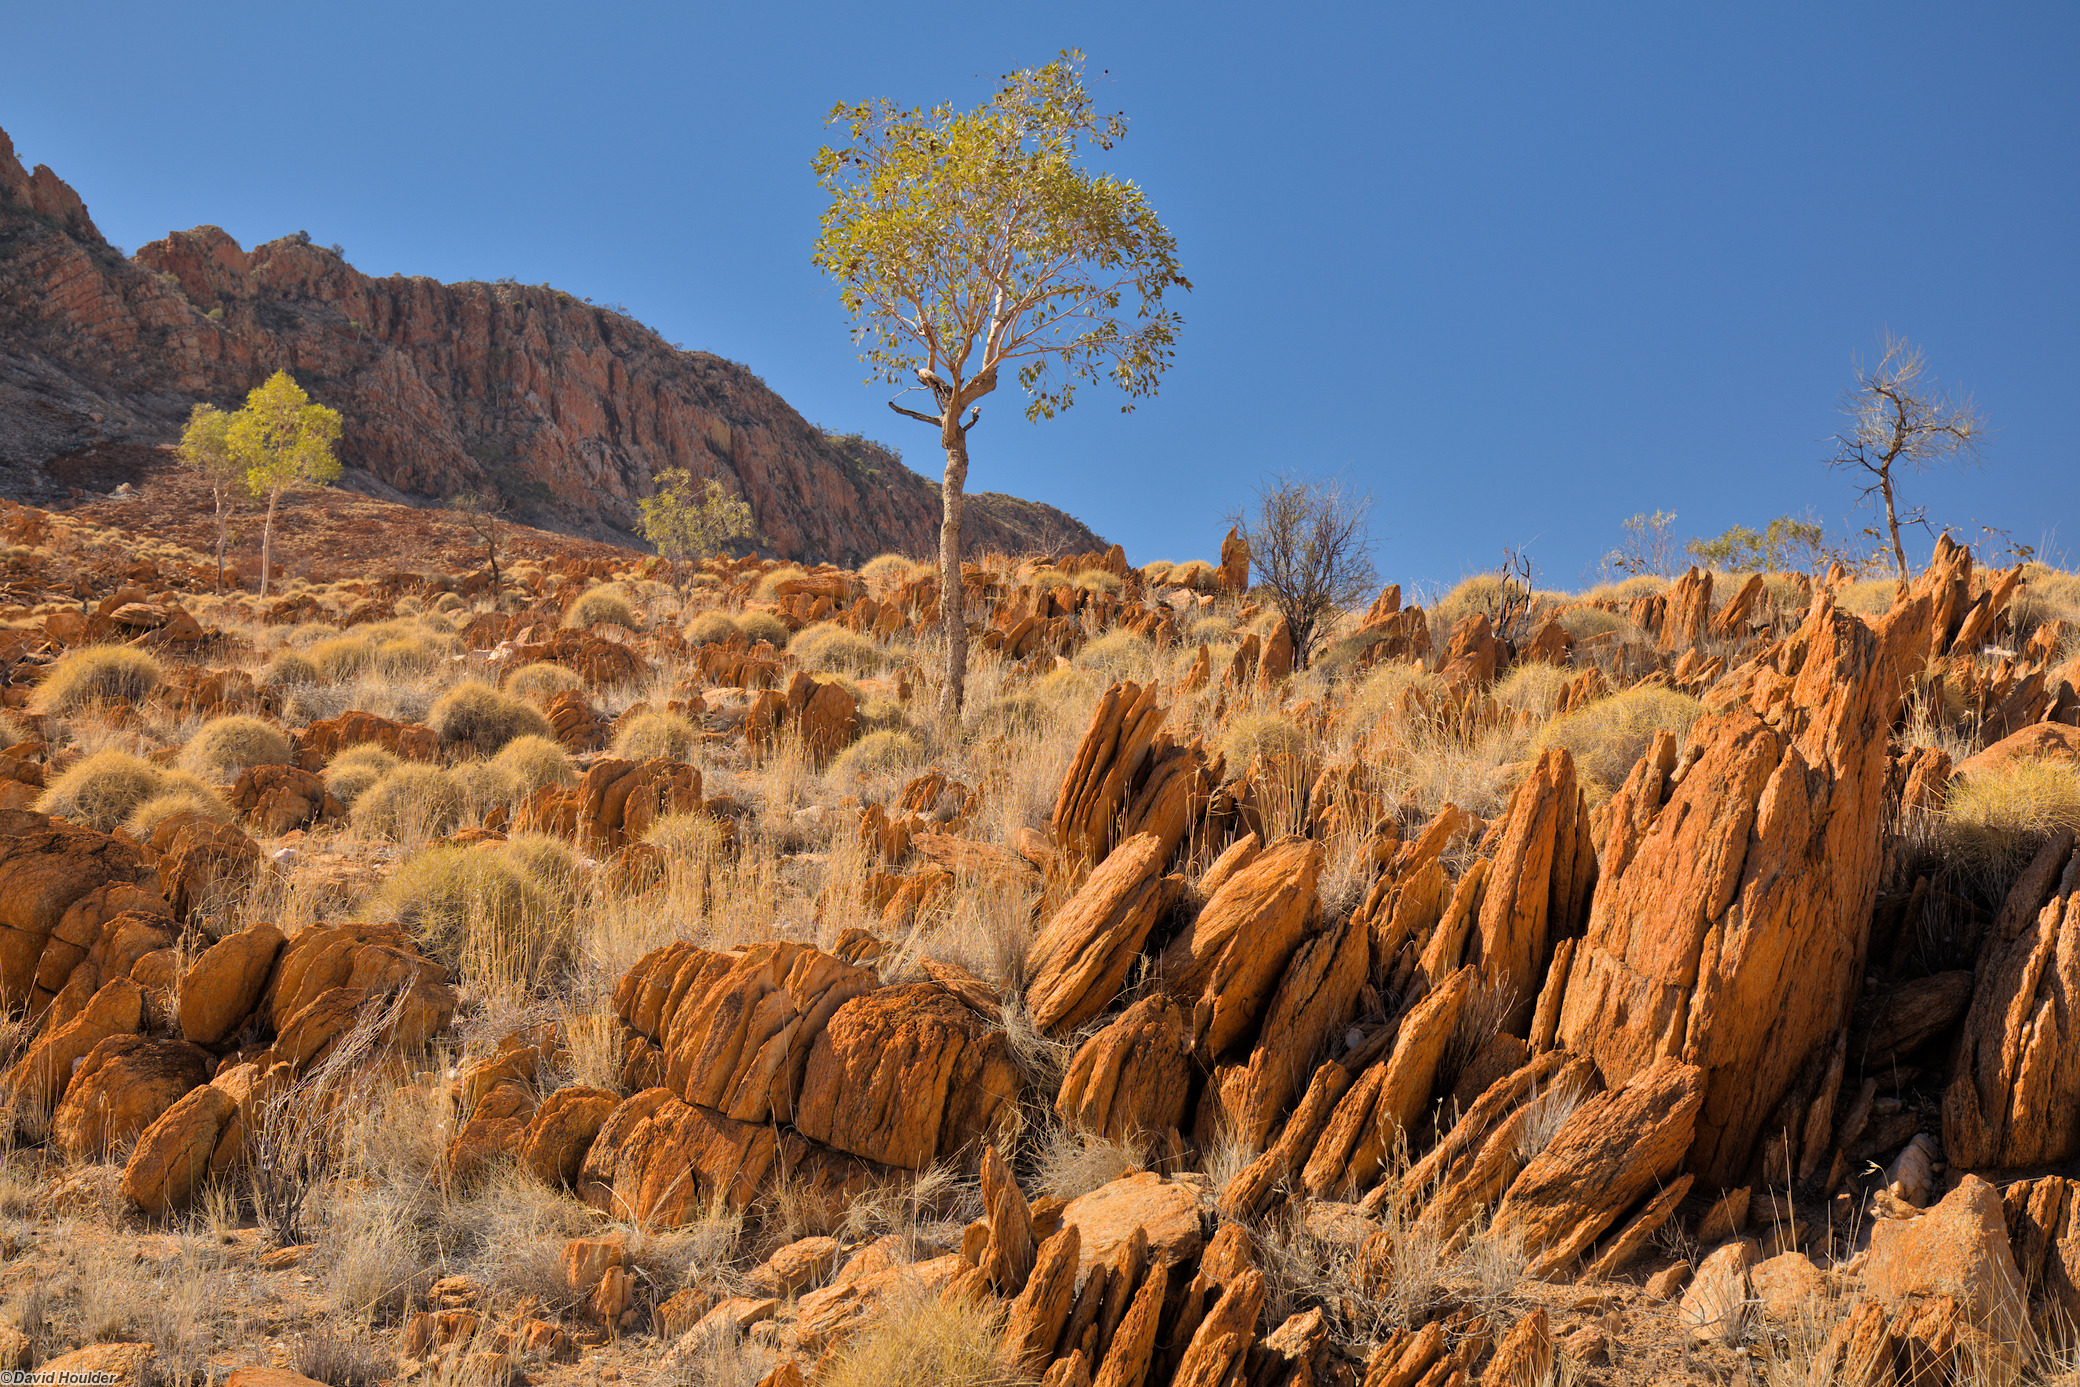 Rocky, arid slope with small tress and a cliff in the background